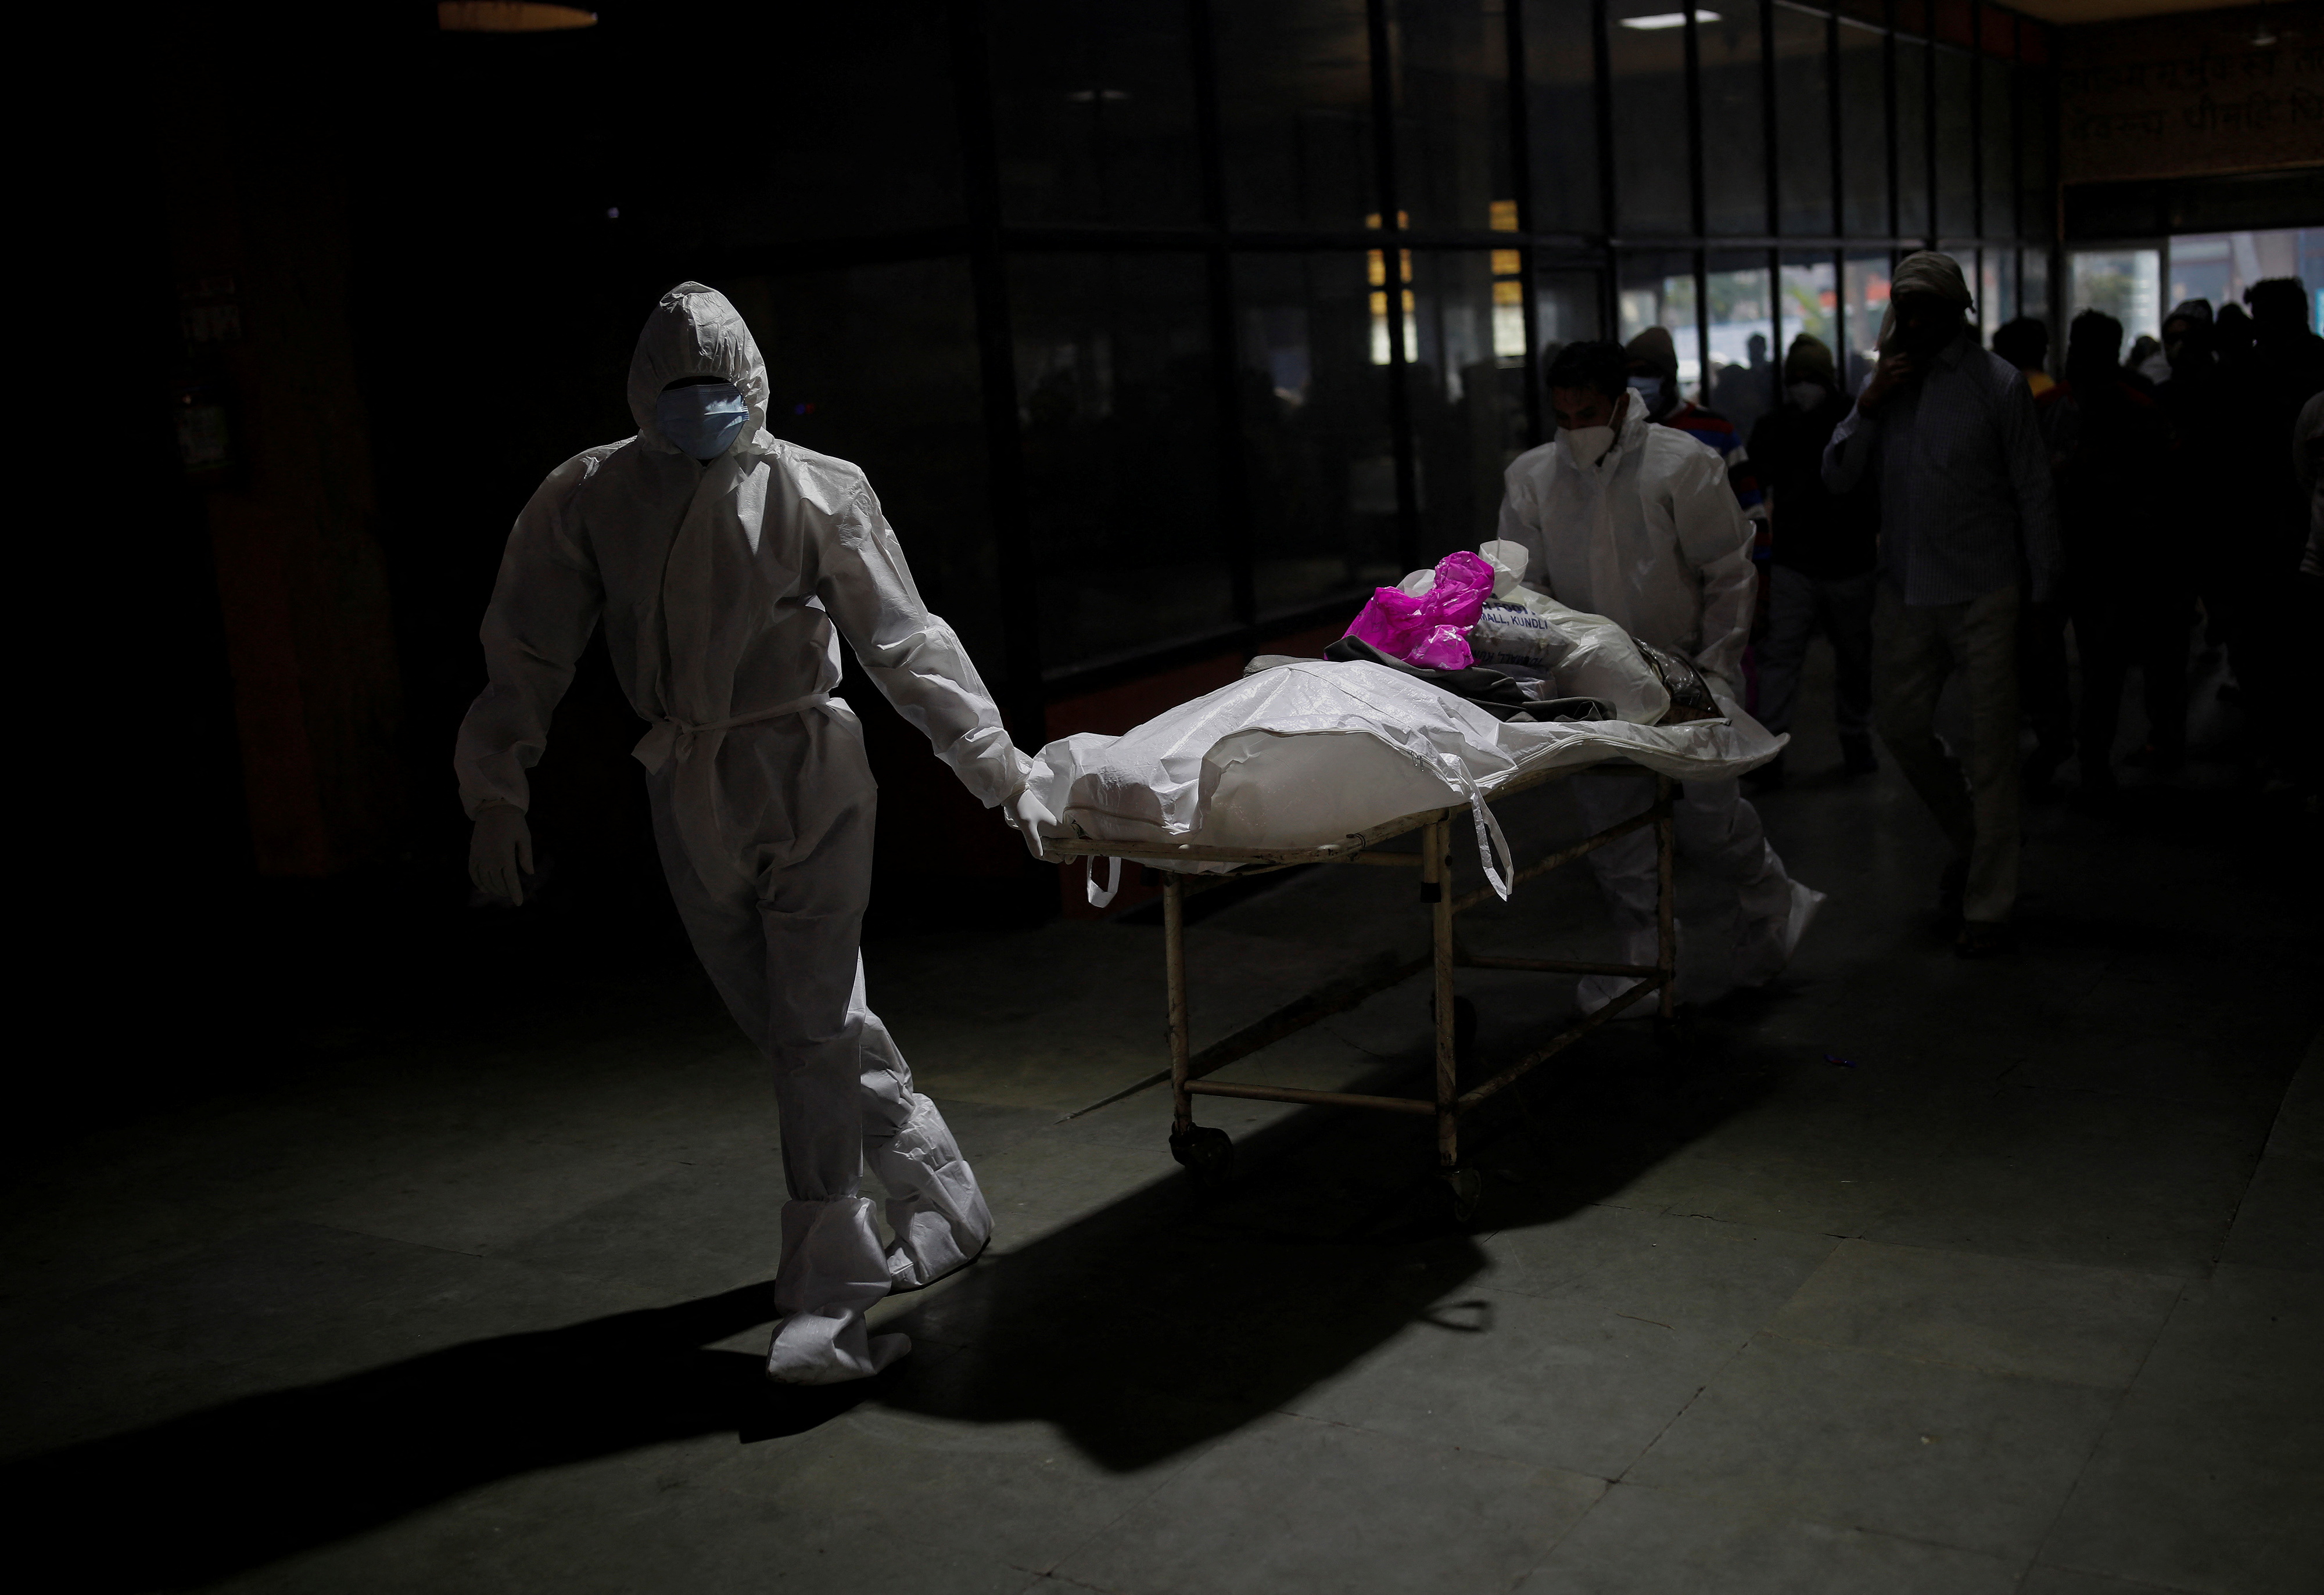 Health workers wearing personal protective equipment (PPE) carry the body of Ramdhan, who died from the coronavirus disease (COVID-19), before his cremation, at a crematorium in New Delhi